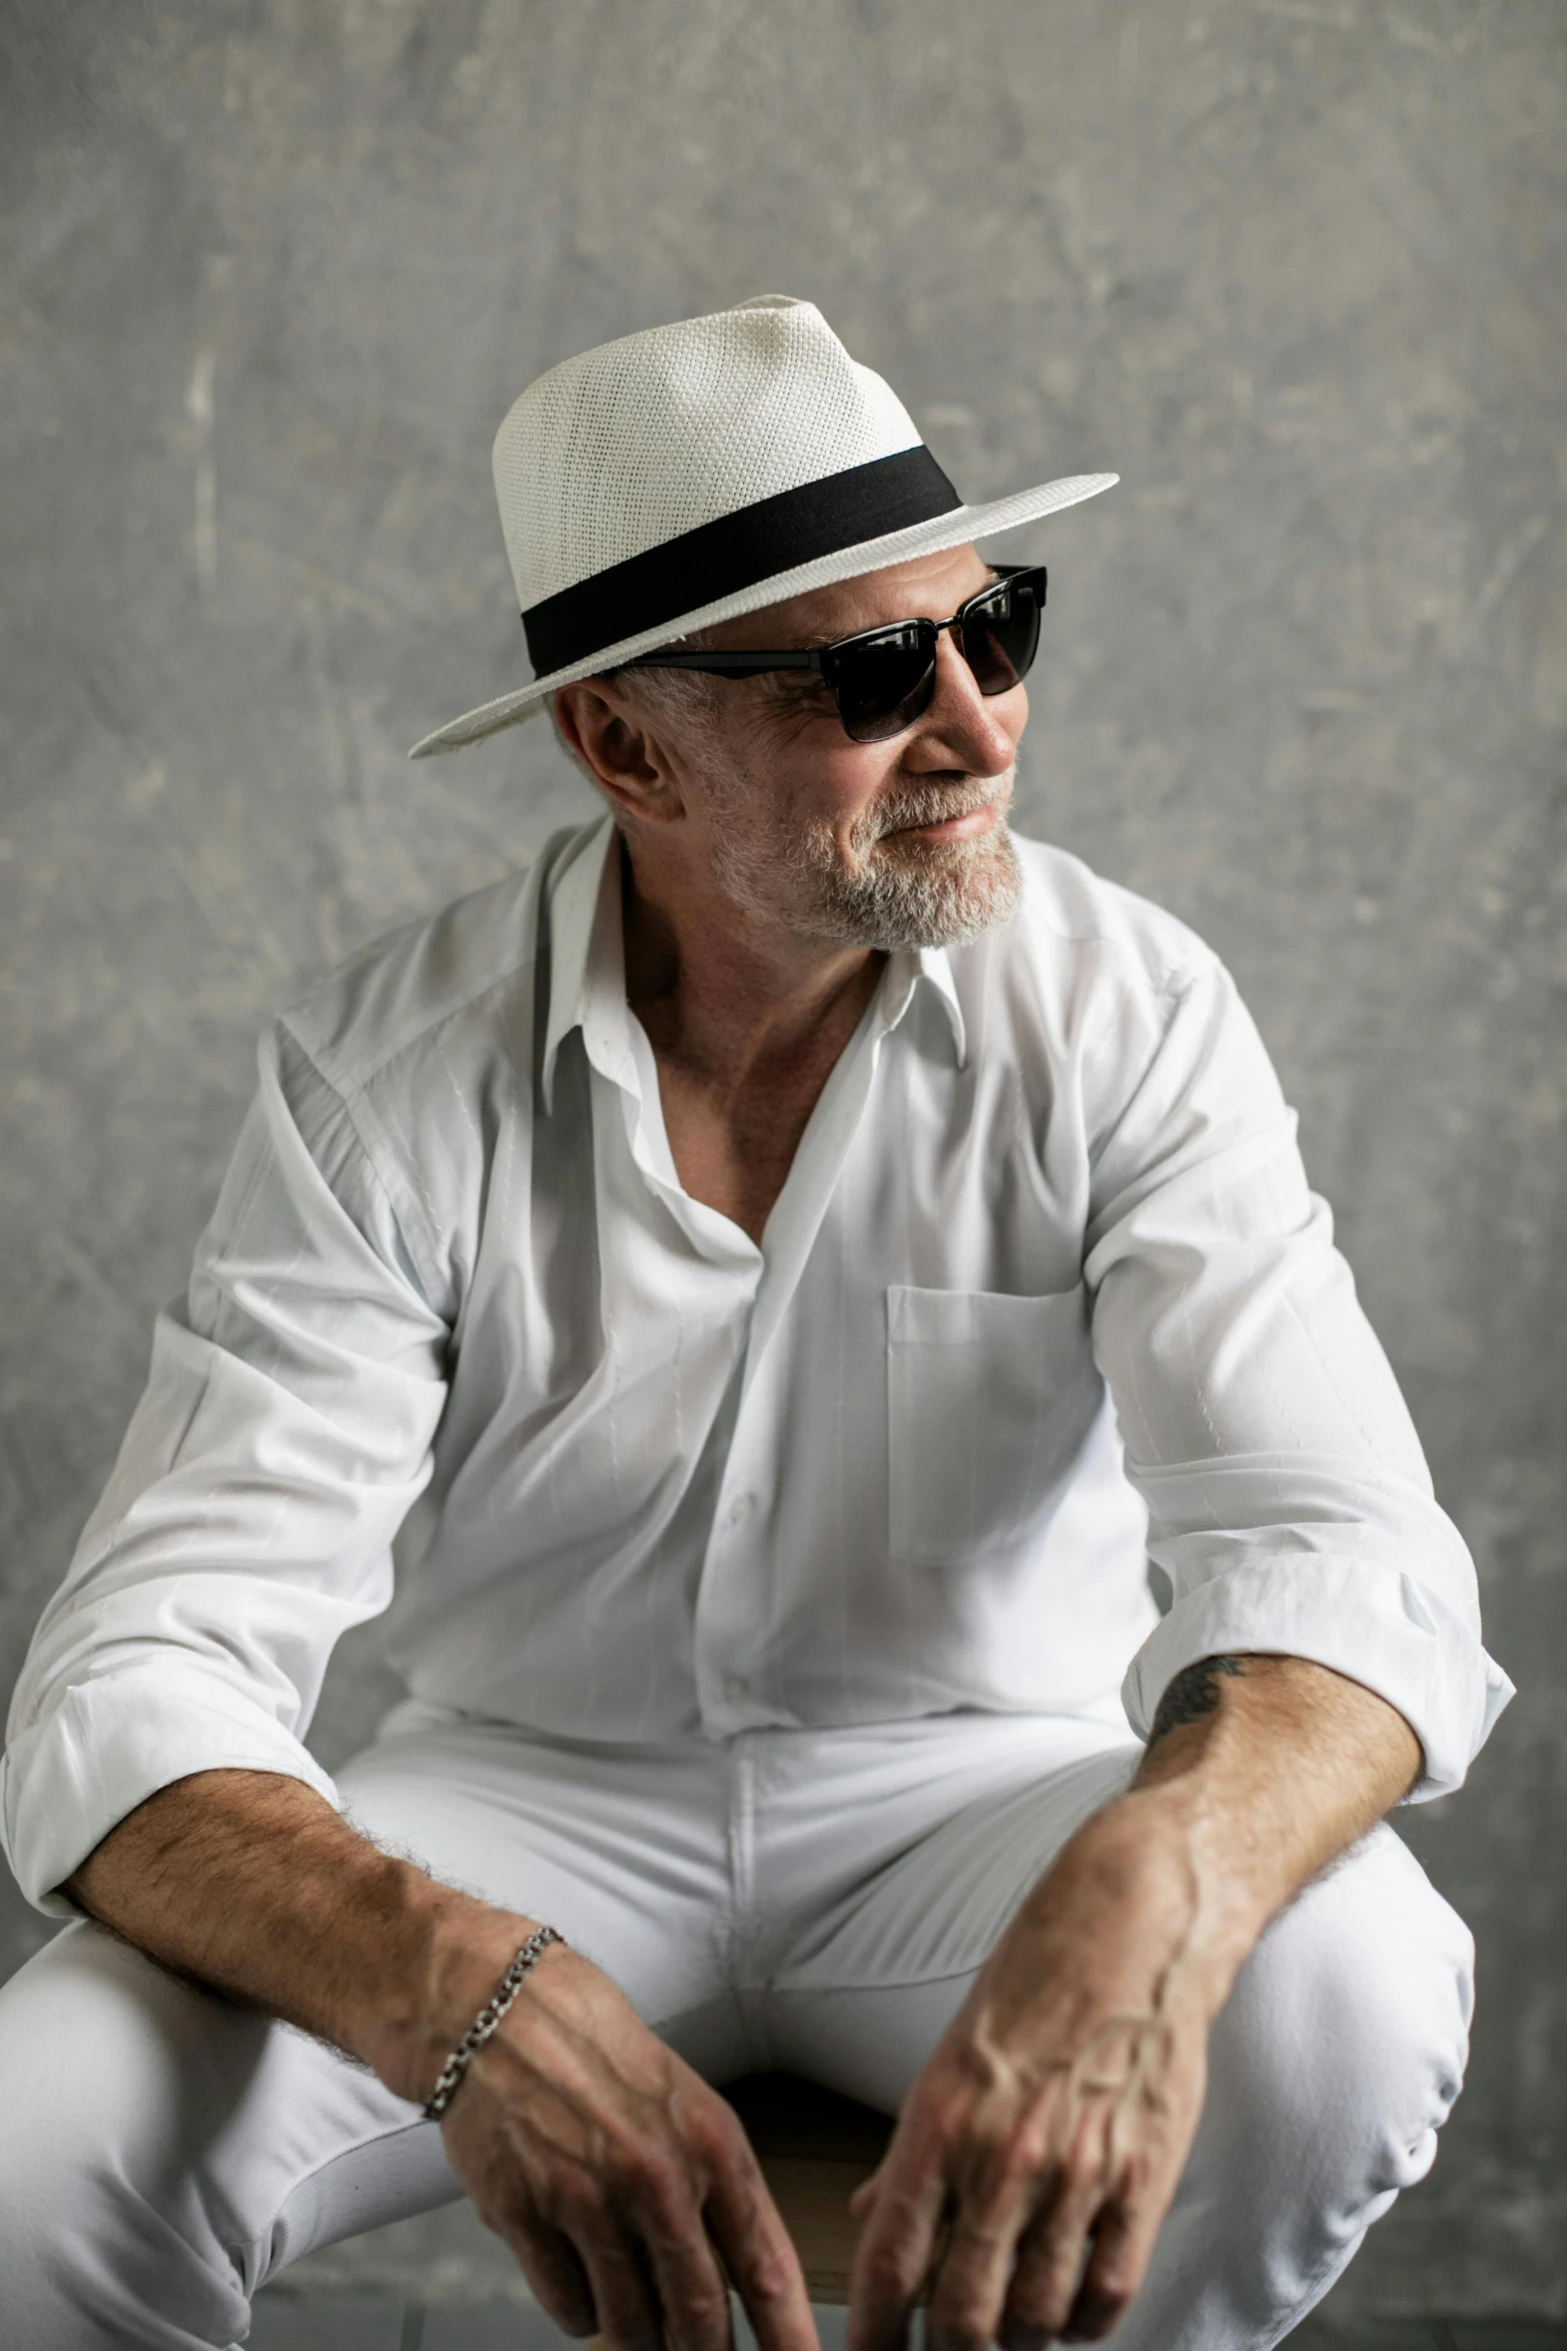 a man in a white shirt and hat sitting on a stool, wearing sunglasses, mike ehrmantraut, stylish pose, profile image